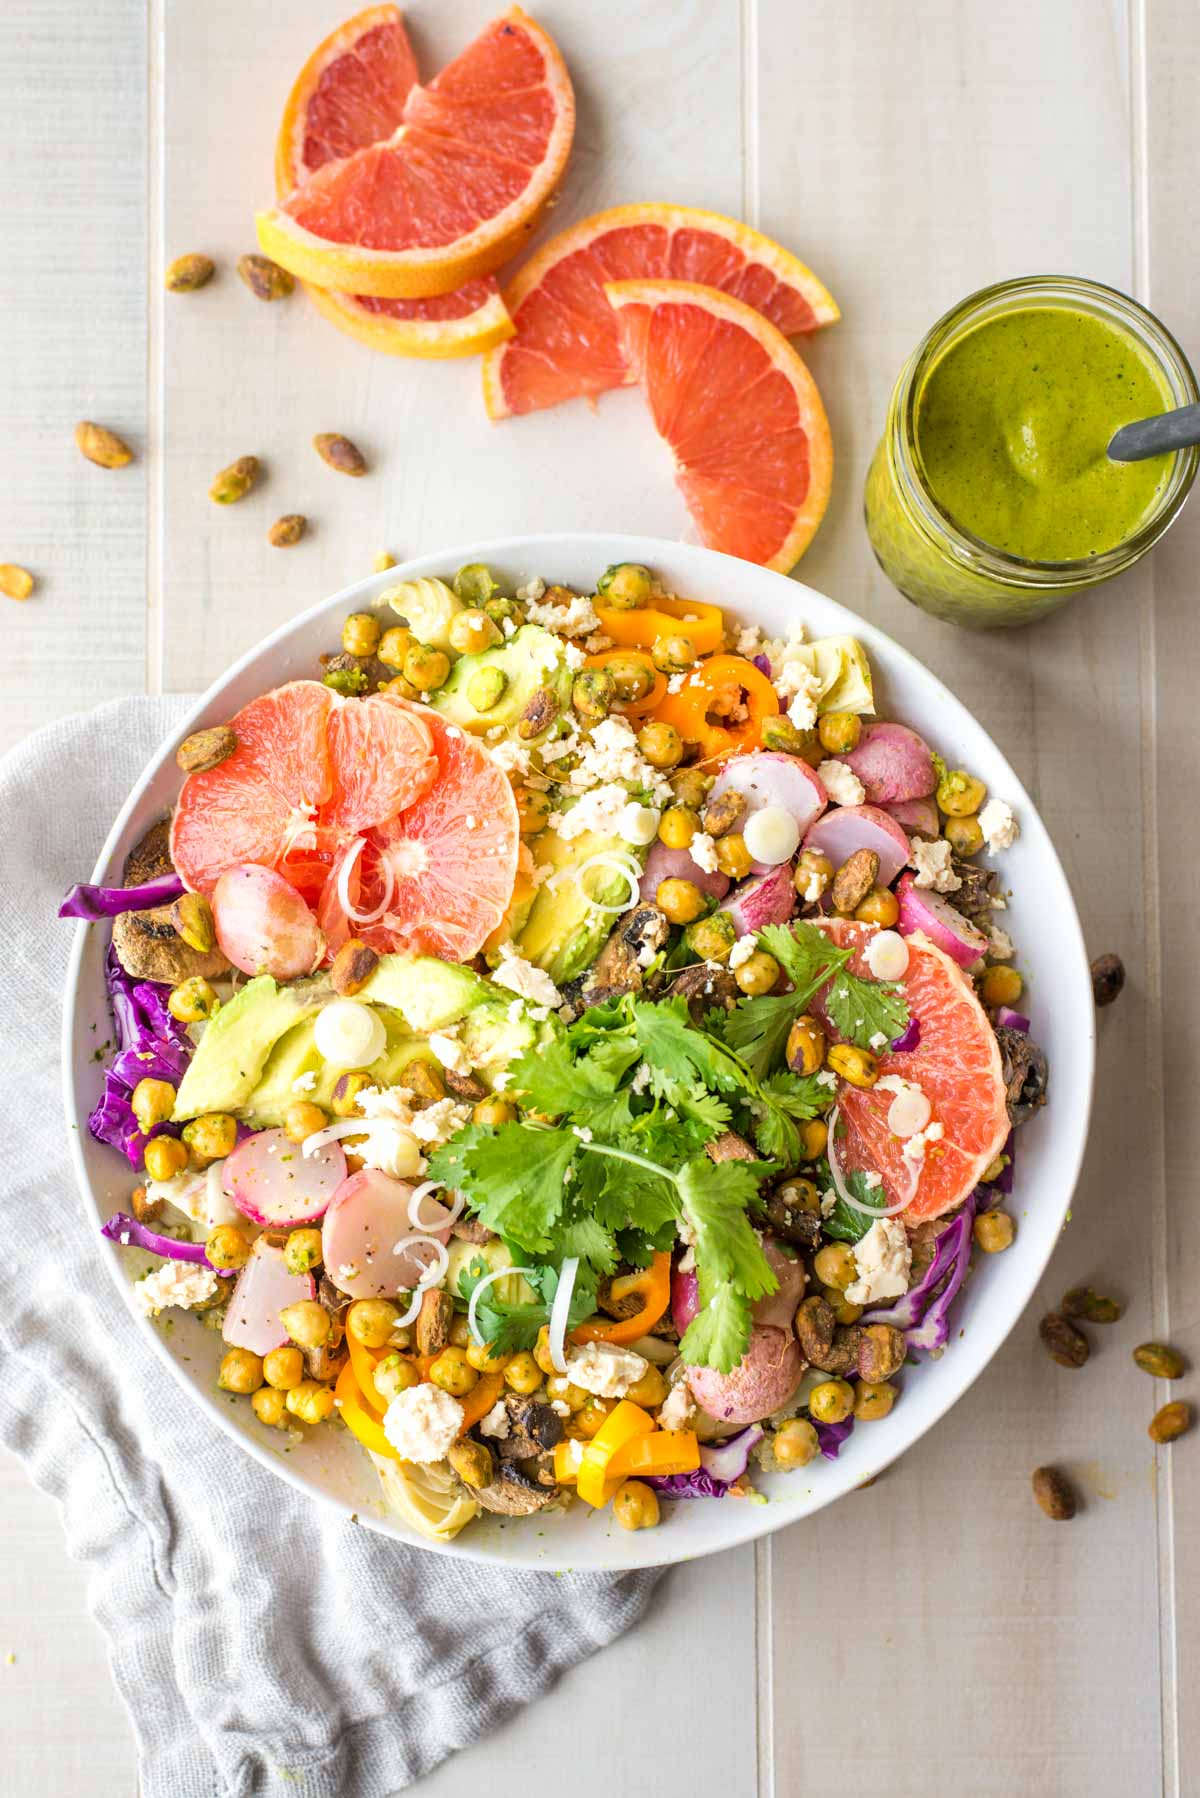 The easy way to detox using only real foods. Check out this simple make ahead detox salad